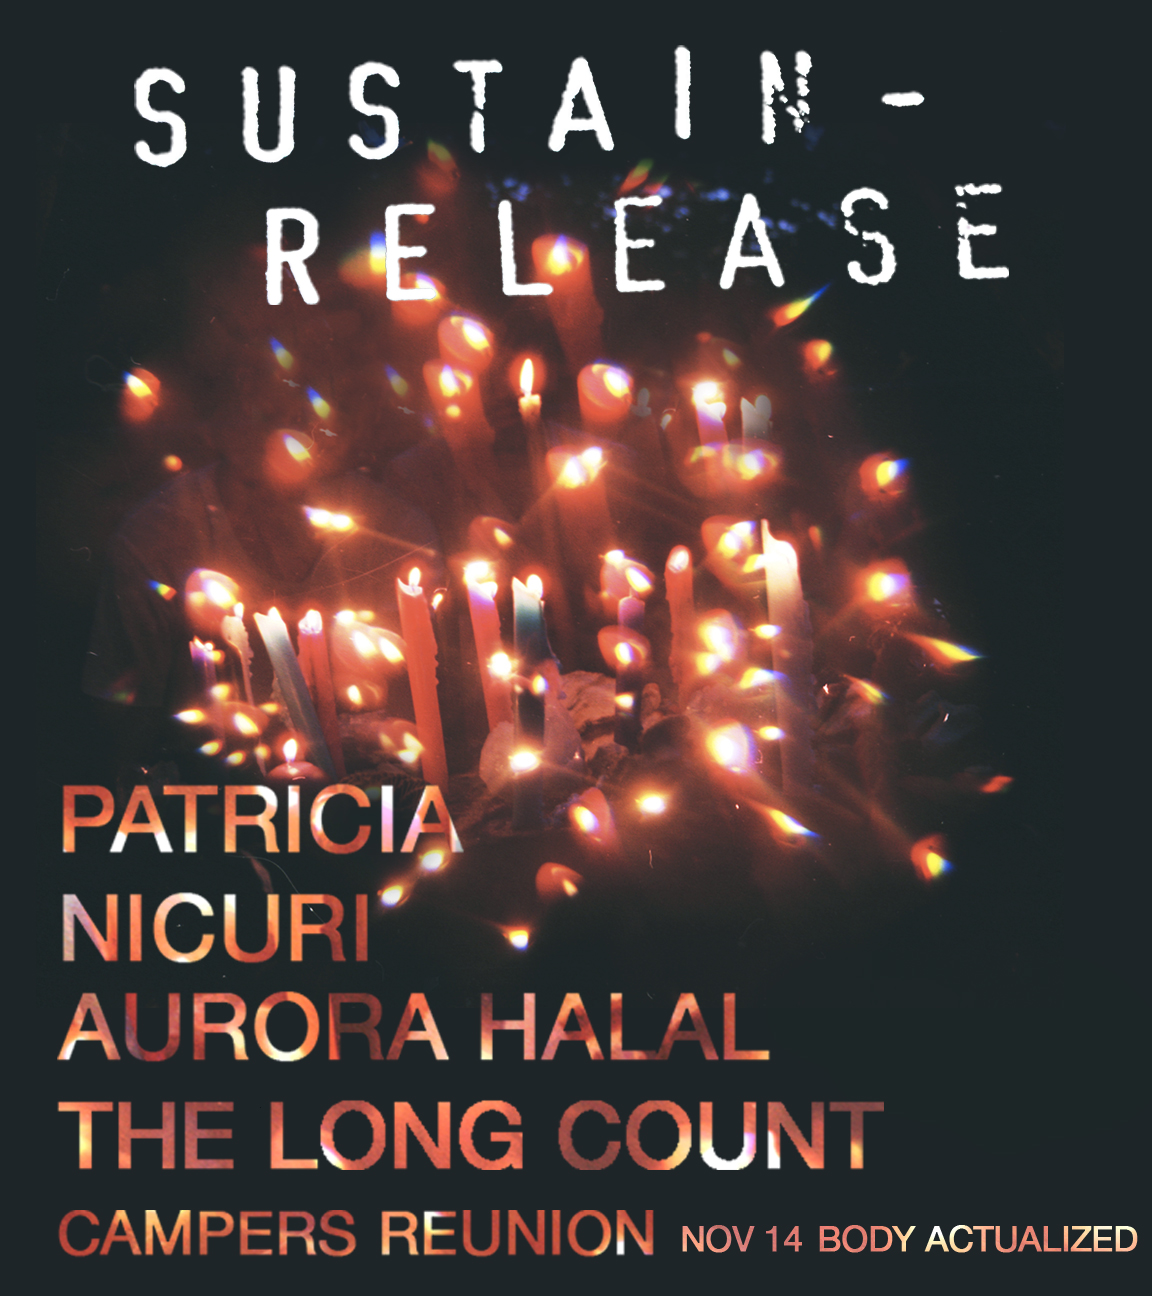    Sustain-Release CAMPERS REUNION: Patricia, Nicuri, Aurora Halal, The Long Count Cycle   November 2014 